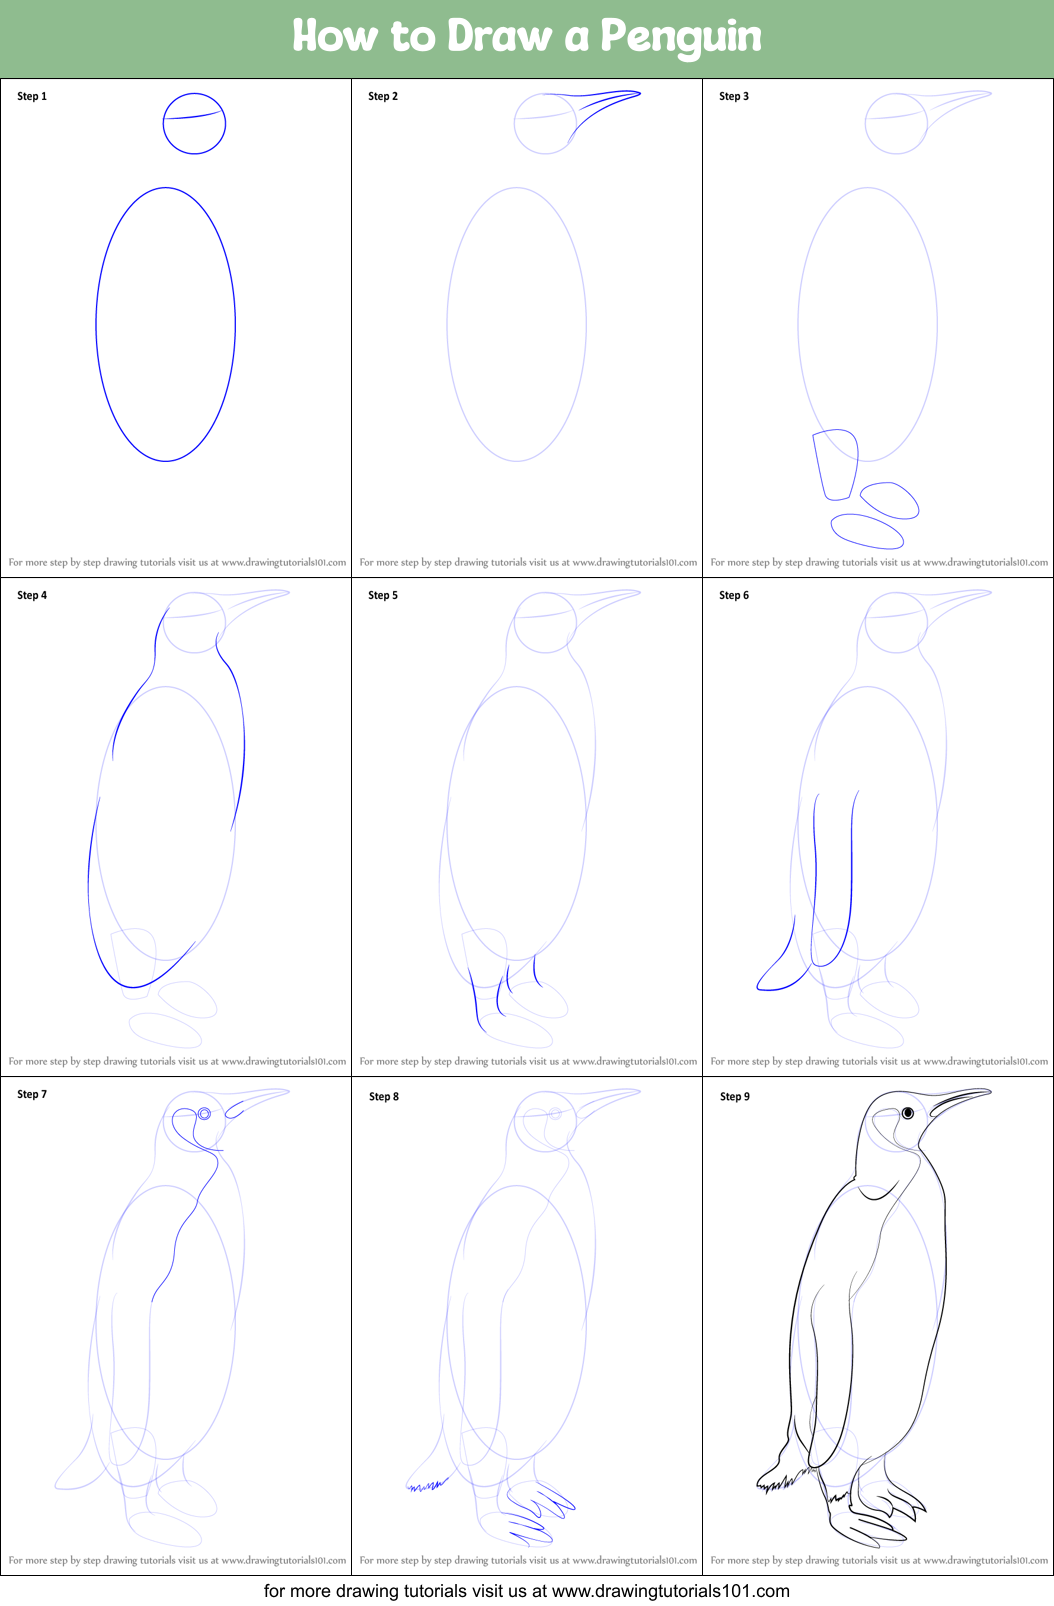 How to Draw a Penguin printable step by step drawing sheet